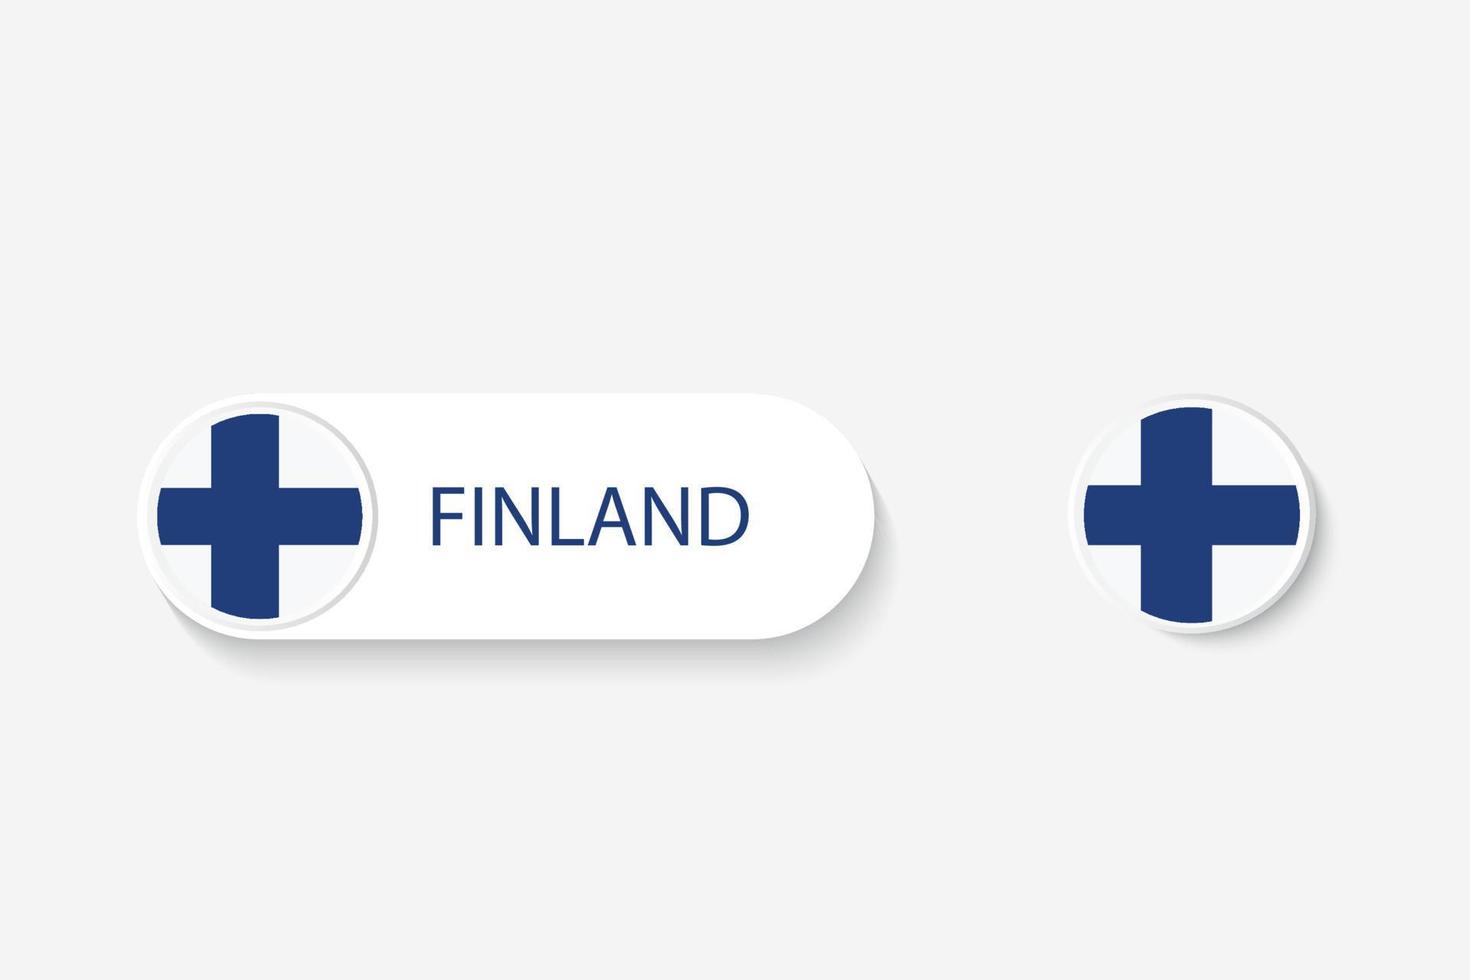 Finland button flag in illustration of oval shaped with word of Finland. And button flag Finland. vector